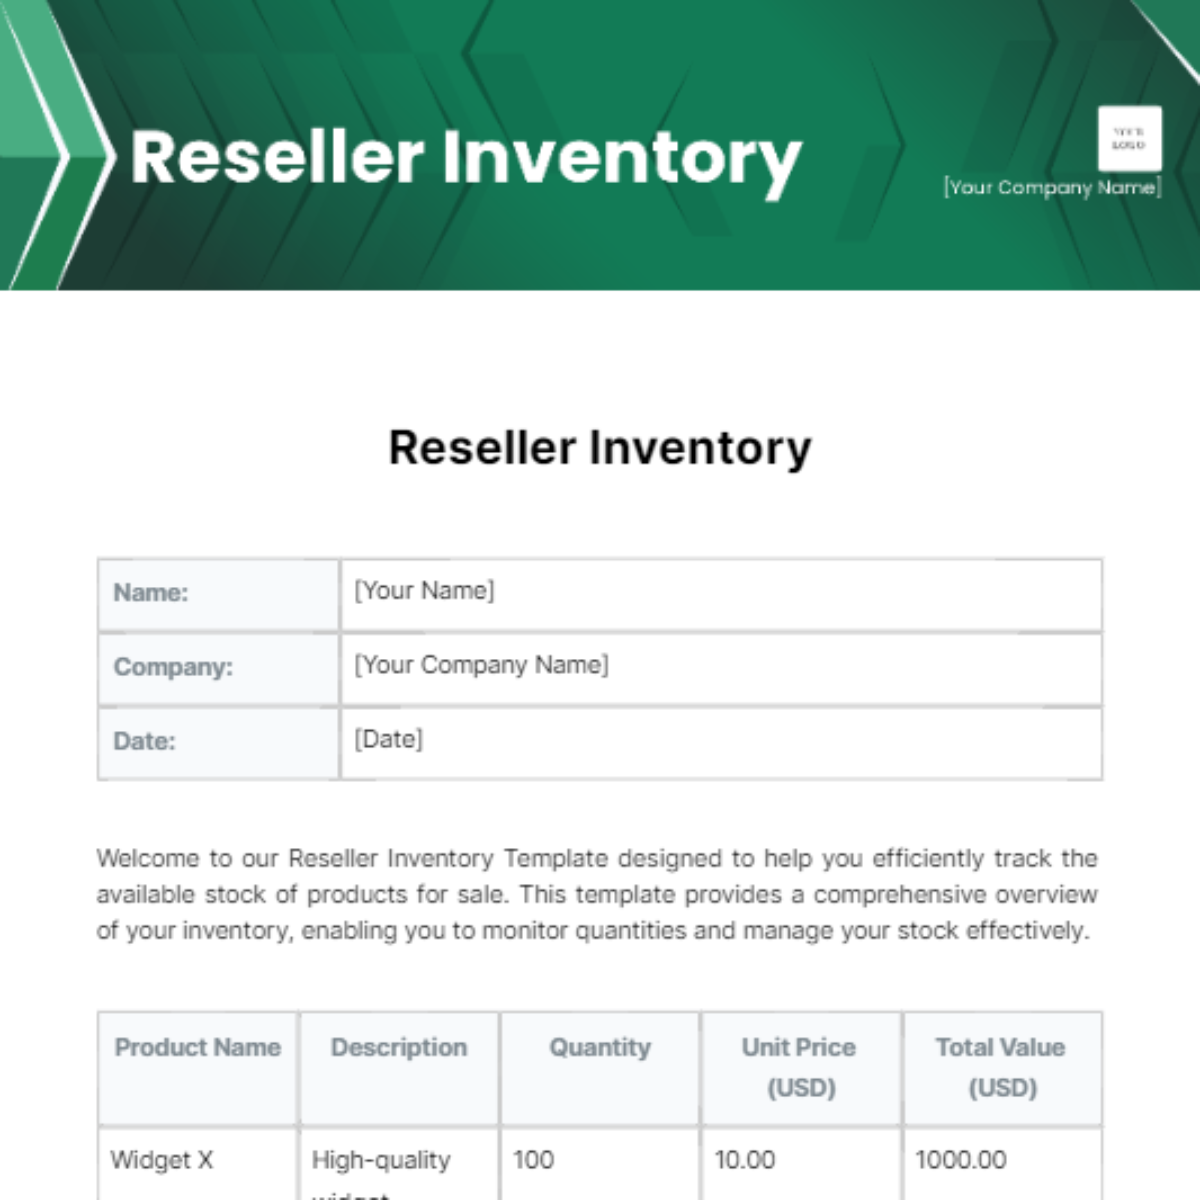 Reseller Inventory Template